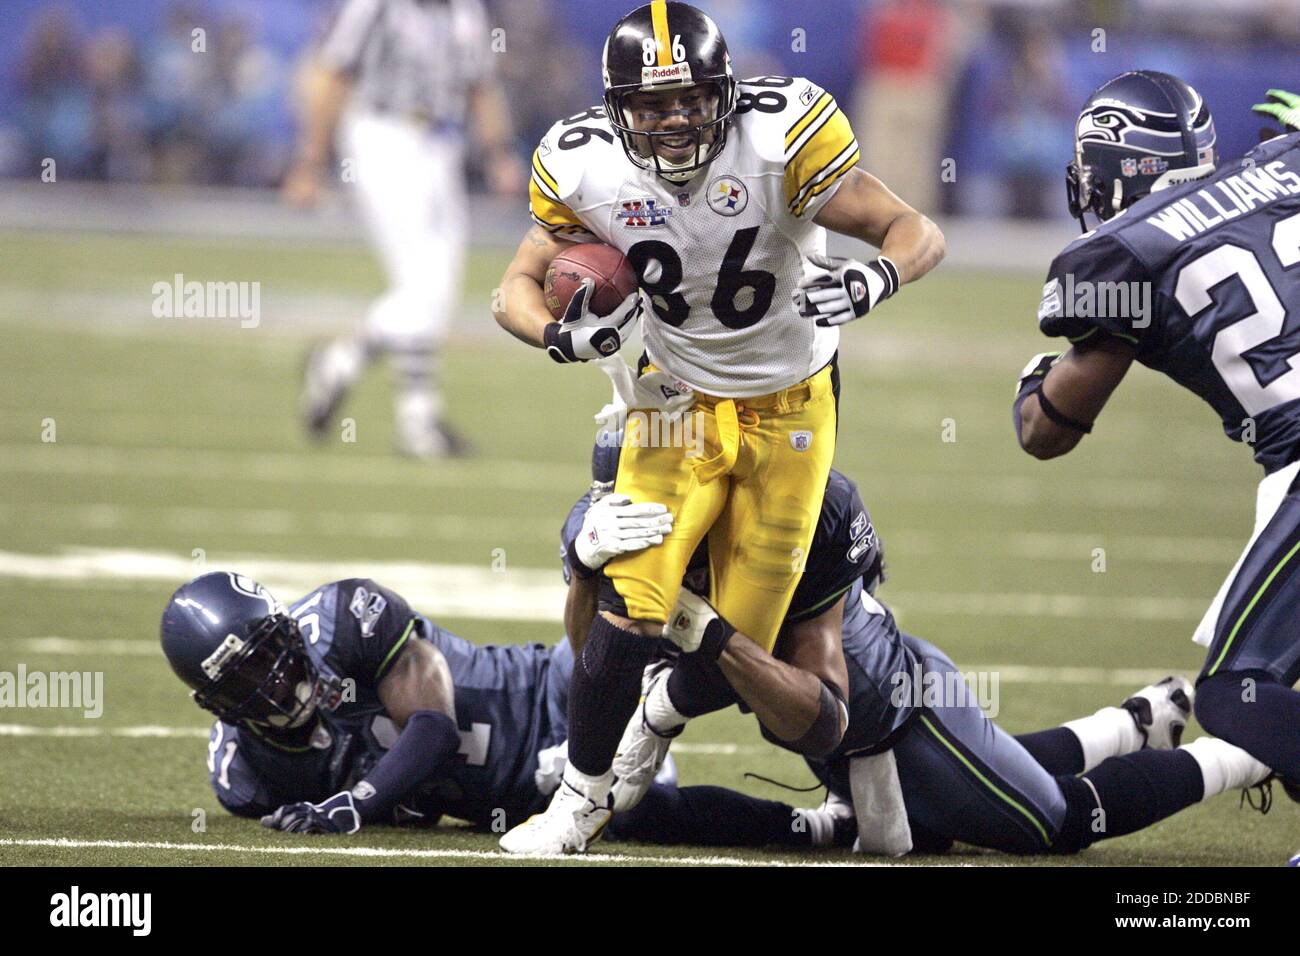 NO FILM, NO VIDEO, NO TV, NO DOCUMENTARY - Pittsburgh Steelers receiver Hines Ward (86) makes a gain against the Seattle Seahawks in the second half of Super Bowl XL in Detroit, MI, USA, on February 5, 2006. Photo by Ed Suba Jr./Akron Beacon Journal/KRT/Cameleon/ABACAPRESS.COM Stock Photo